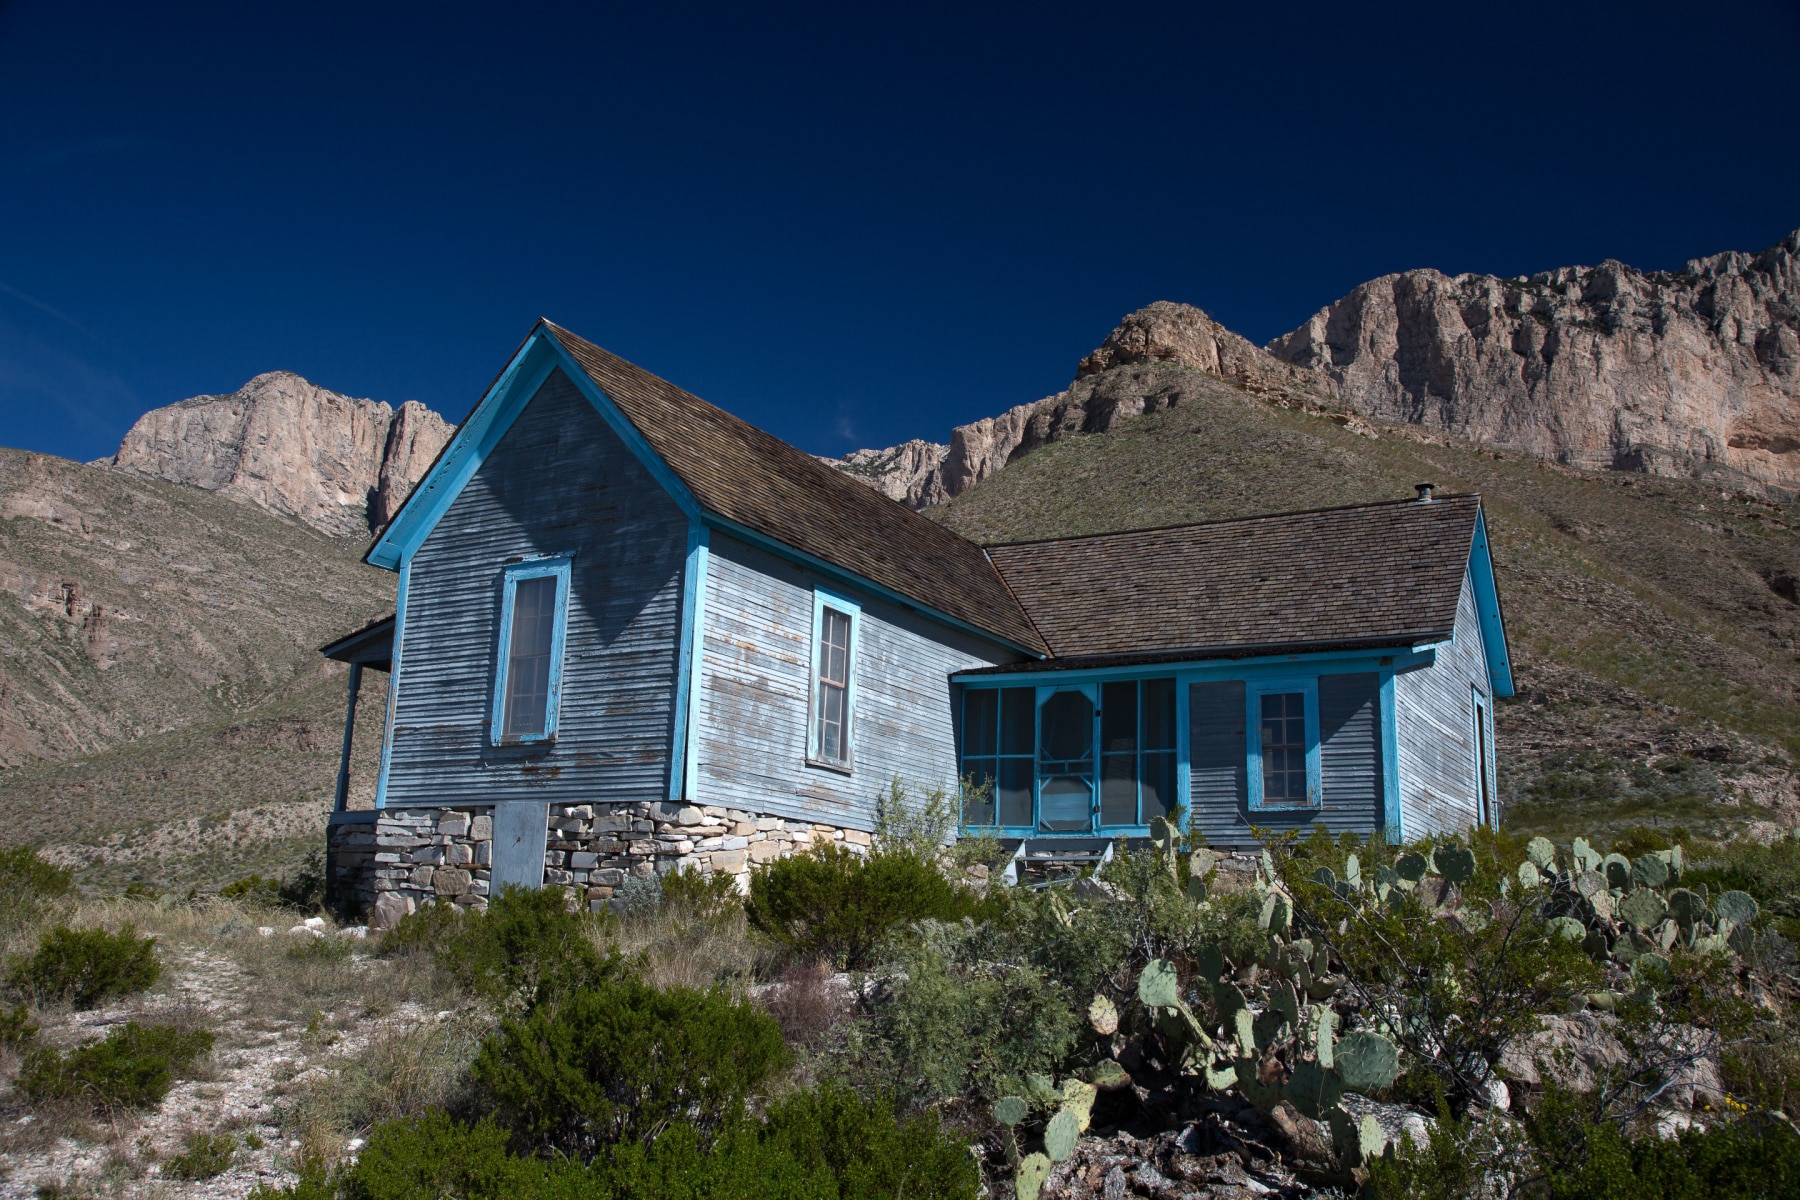 A weather blue home known as William Ranch is in a remote section of Guadalupe Mountains National Park.